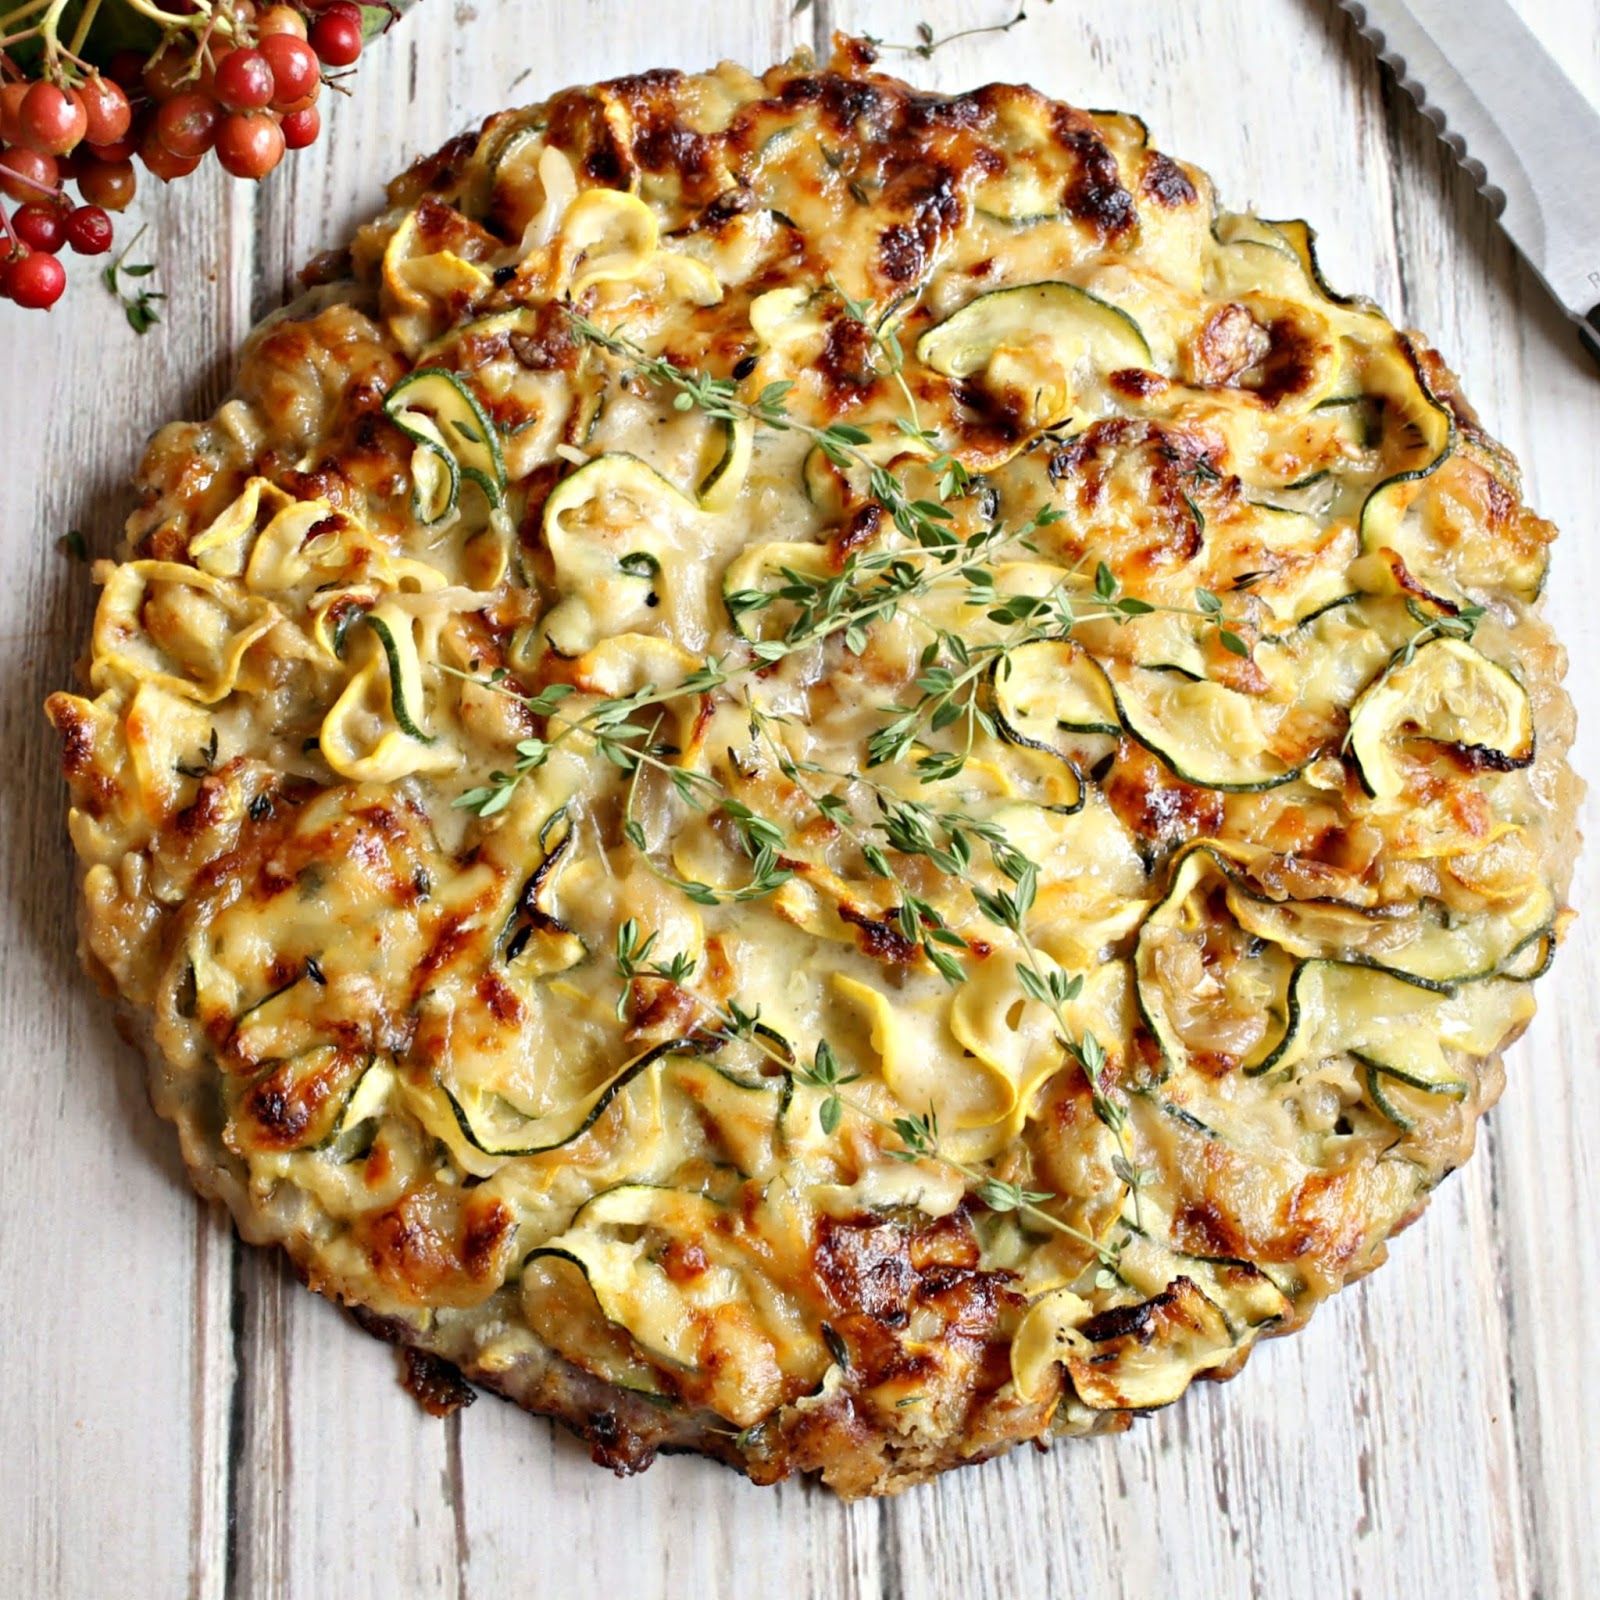 Savory zucchini tart with fontina cheese in a buttery walnut crust.